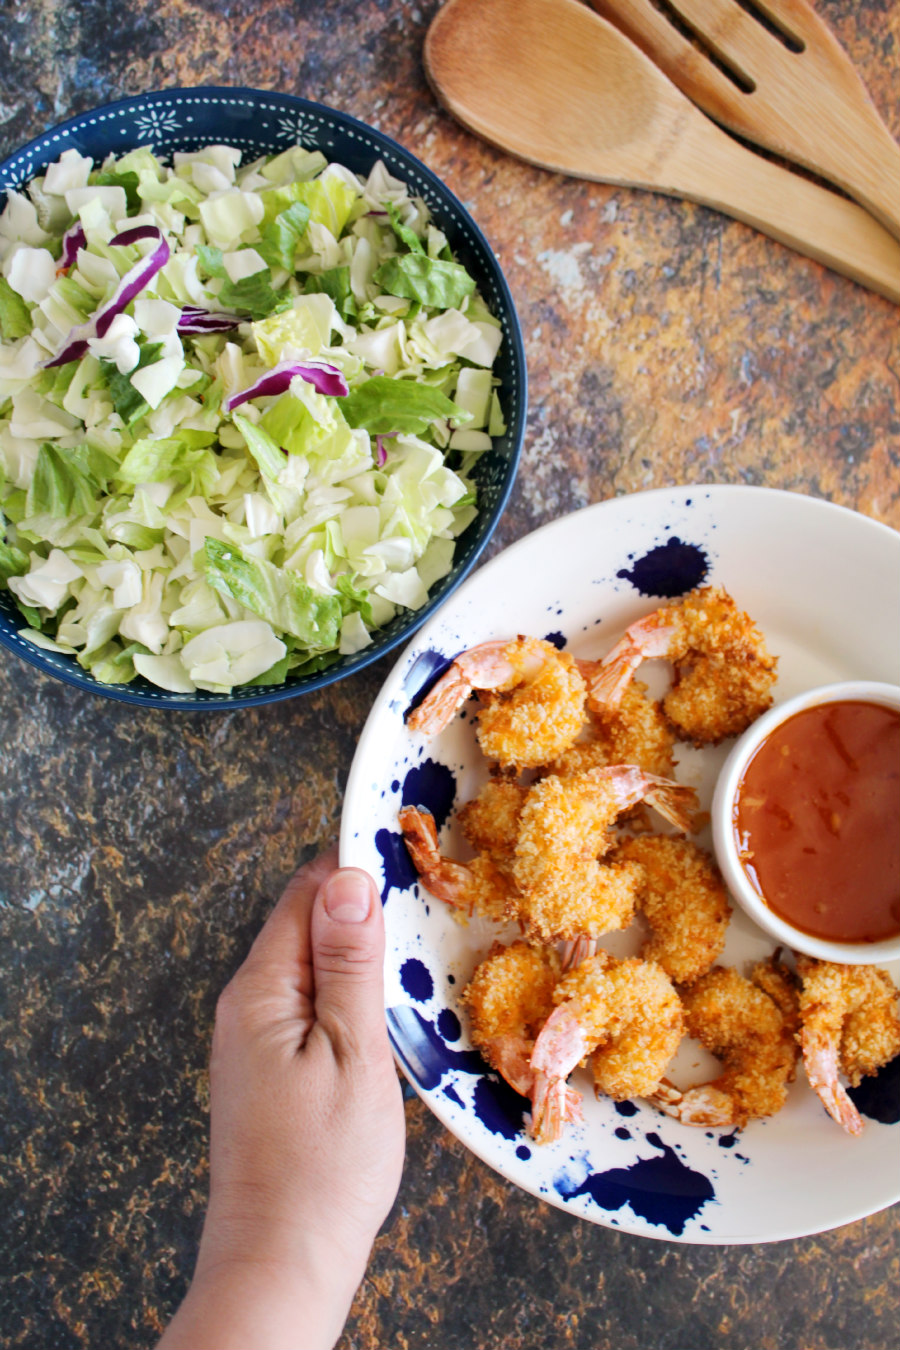 This Air Fryer Coconut Shrimp delivers crispy, tasty shrimp that's healthier than the popular classic, fried coconut shrimp, and it's ready in 10 minutes or less. Serve with Sweet Chili Apricot Sauce for a simple appetizer or with a salad for an easy weeknight meal.